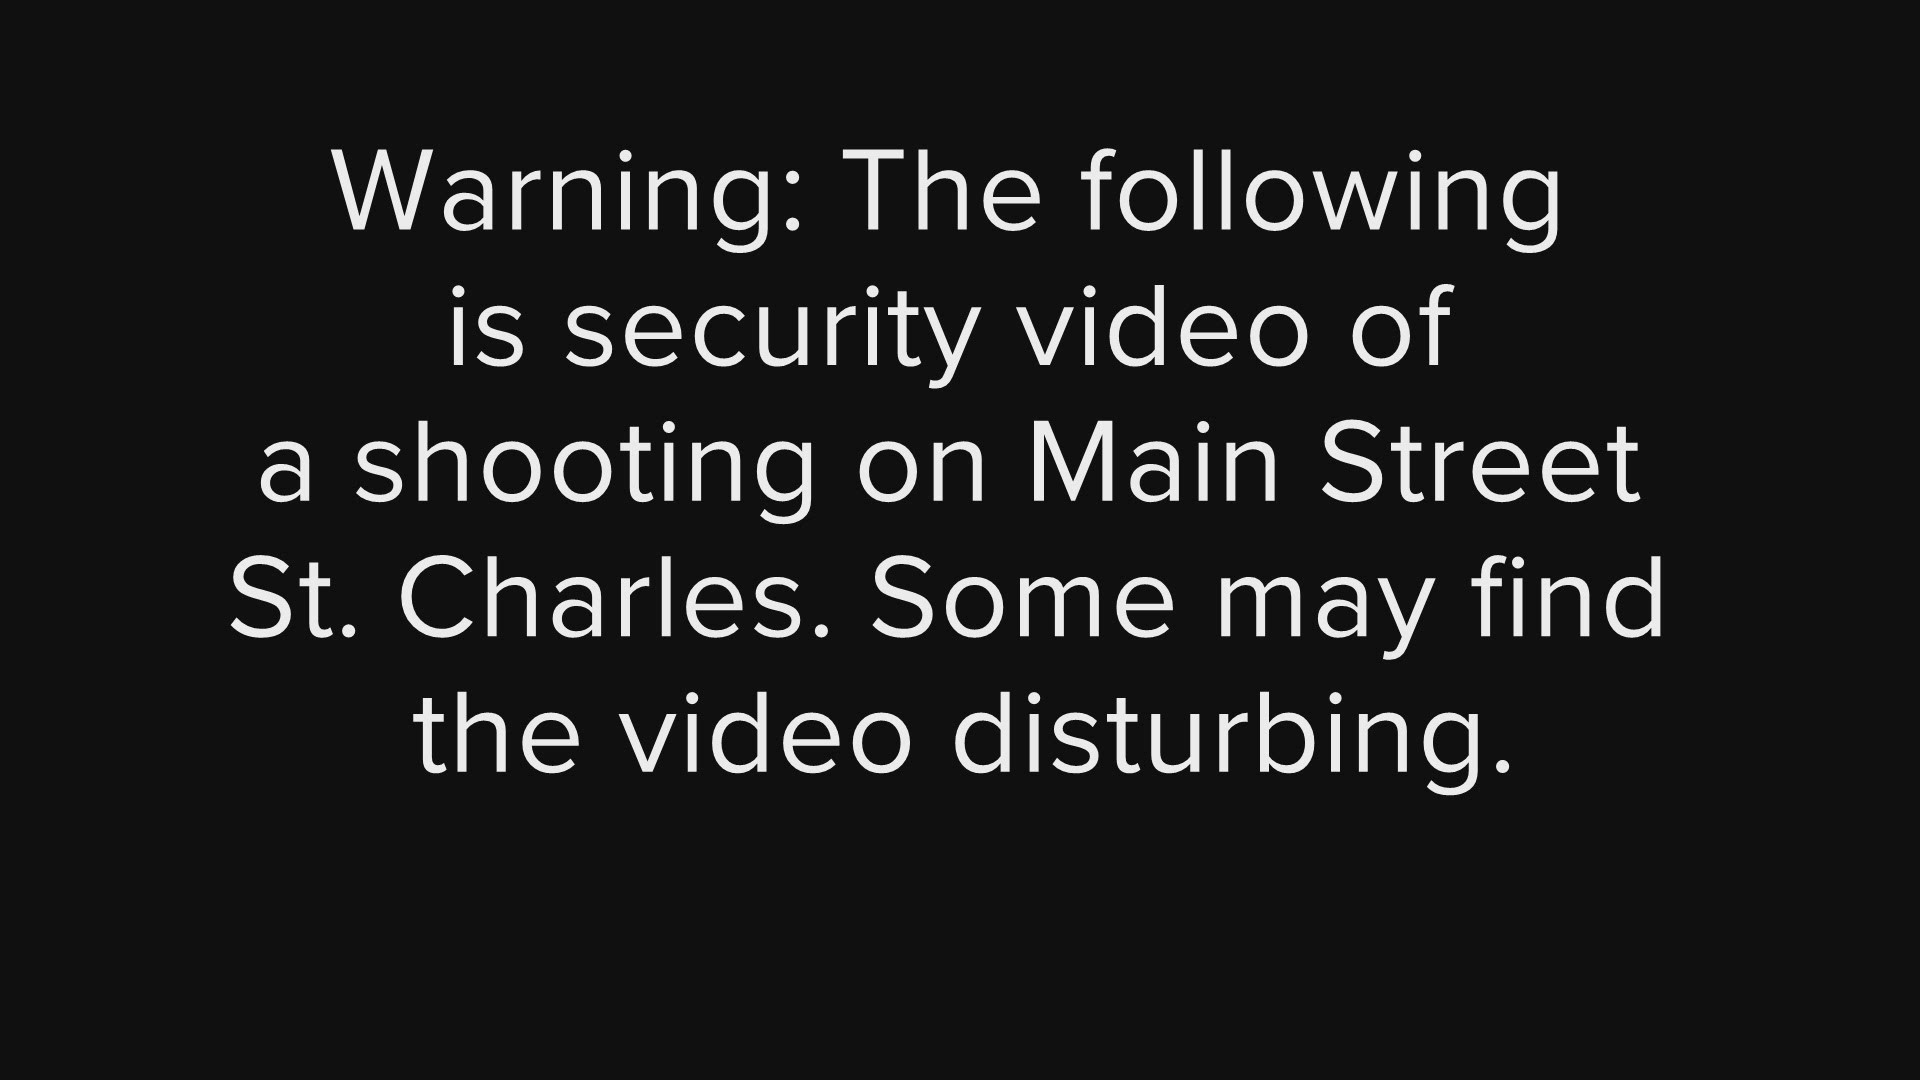 Warning: This is security video fo a shooting on Main Street St. Charles. Some may find the video disturbing.